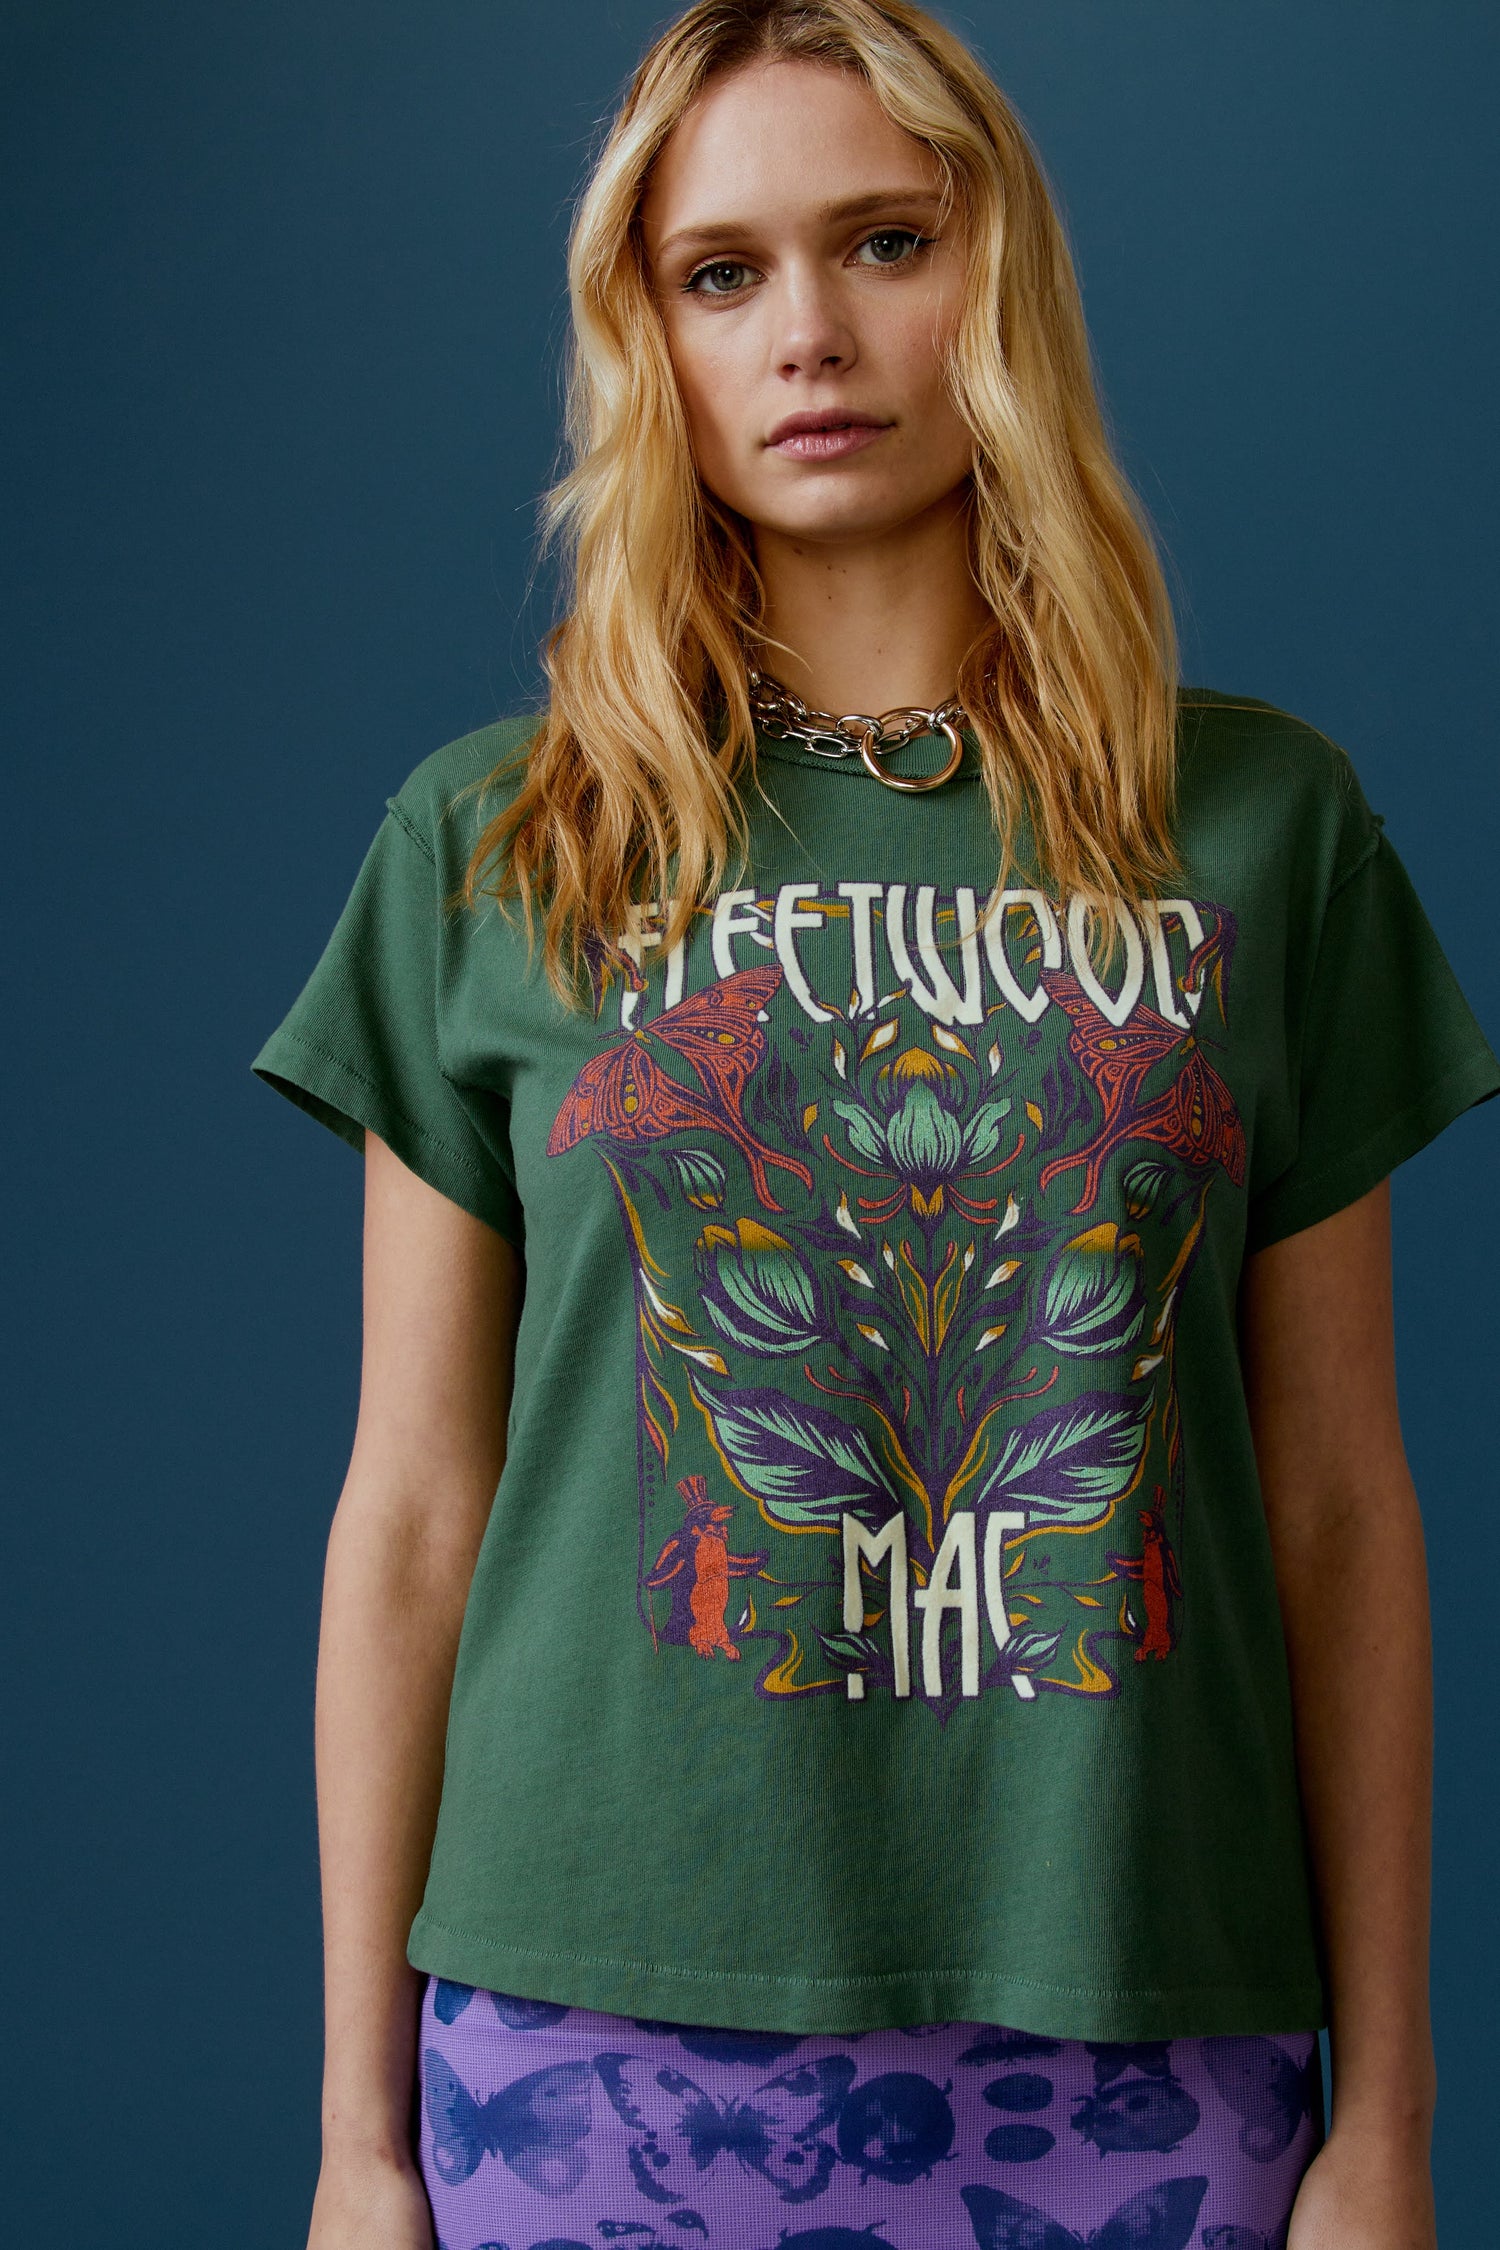 A blonde-haired model featuring a stormy green tee stamped with the band's name, designed with a graphic of leaves, flowers, and butterflies on the center.